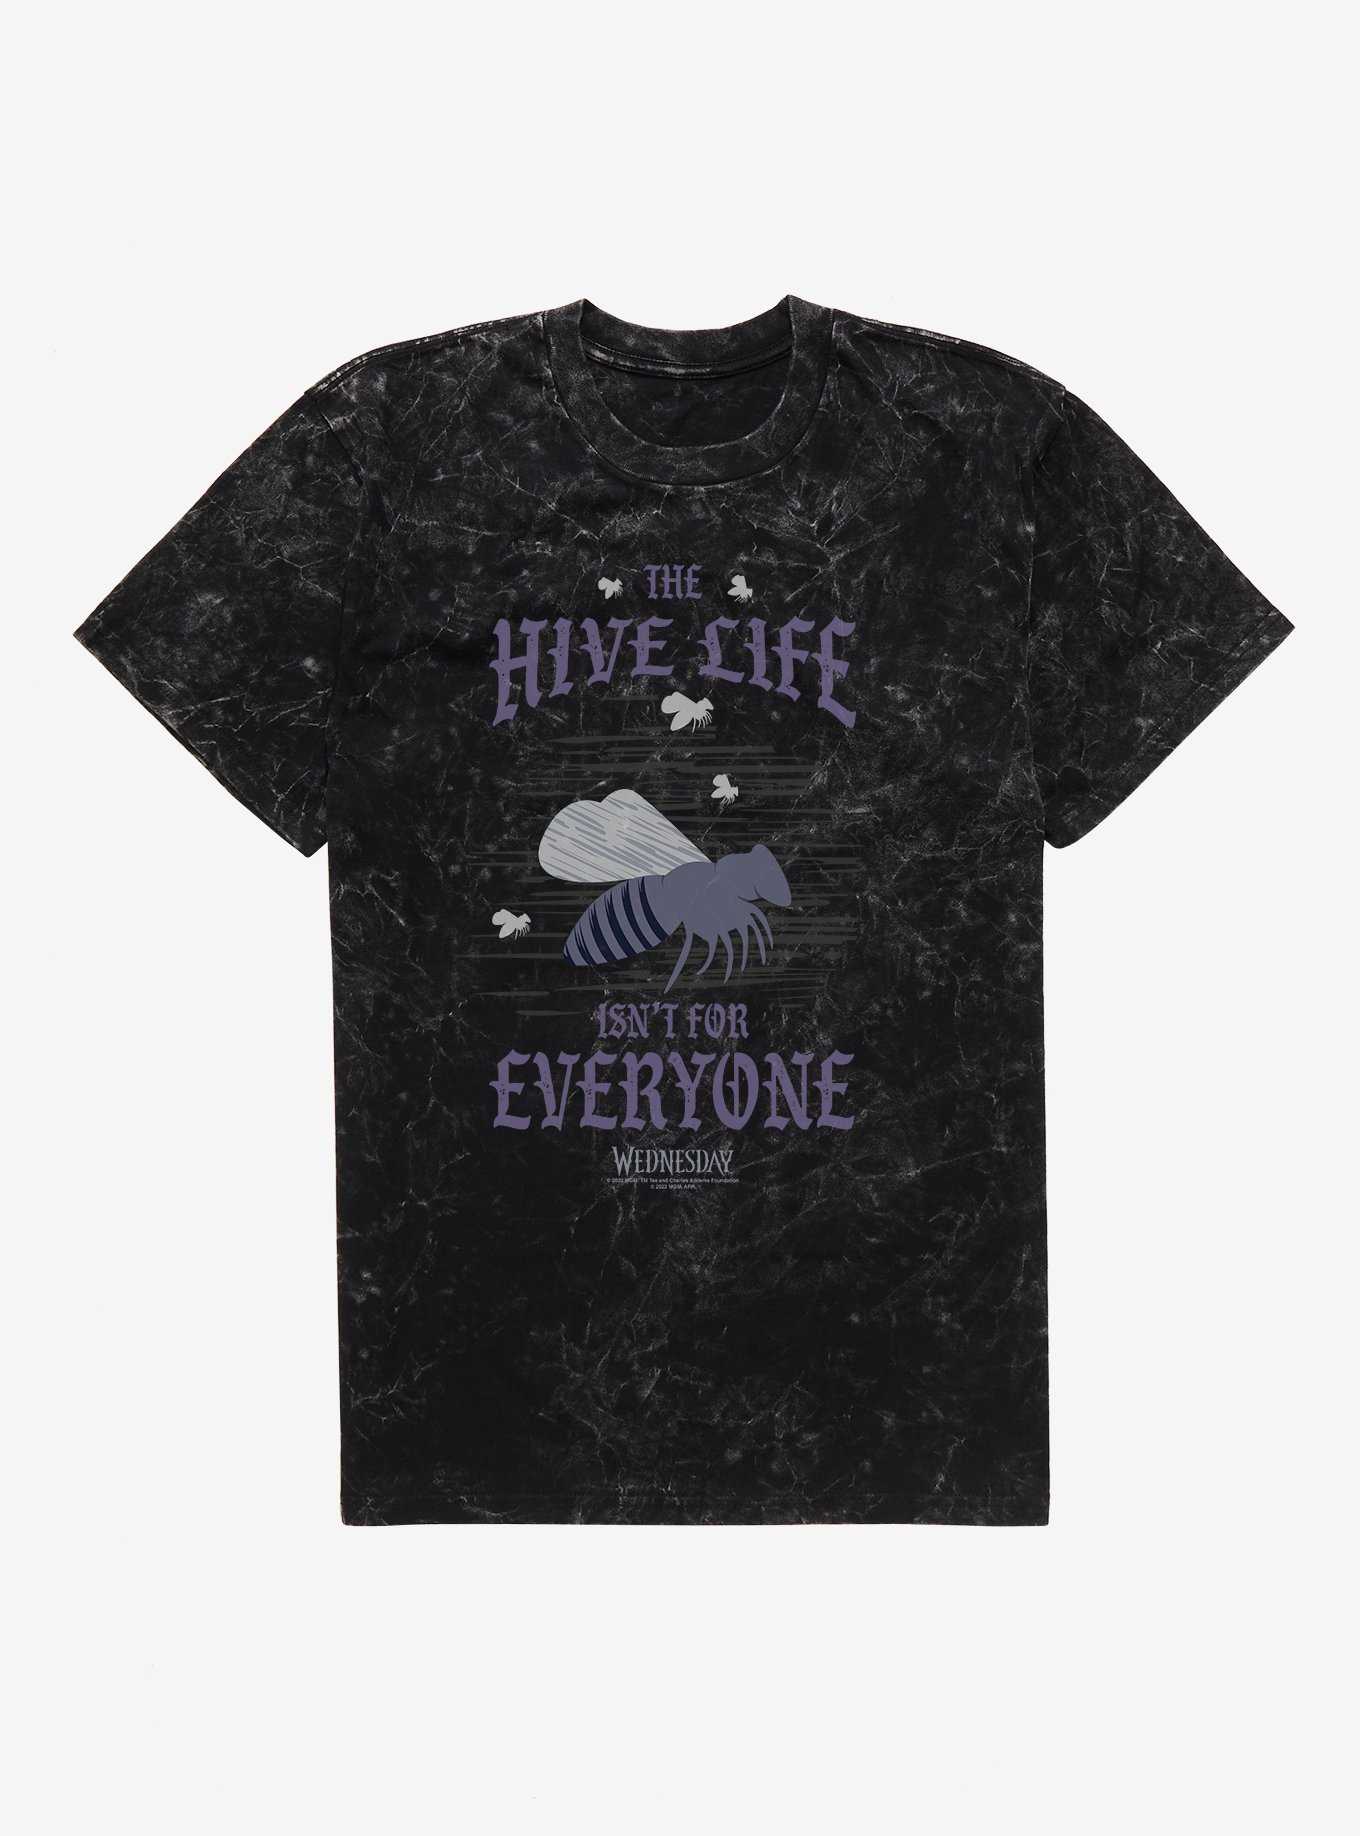 Wednesday The Hive Life Isn't For Everyone Mineral Wash T-Shirt, , hi-res